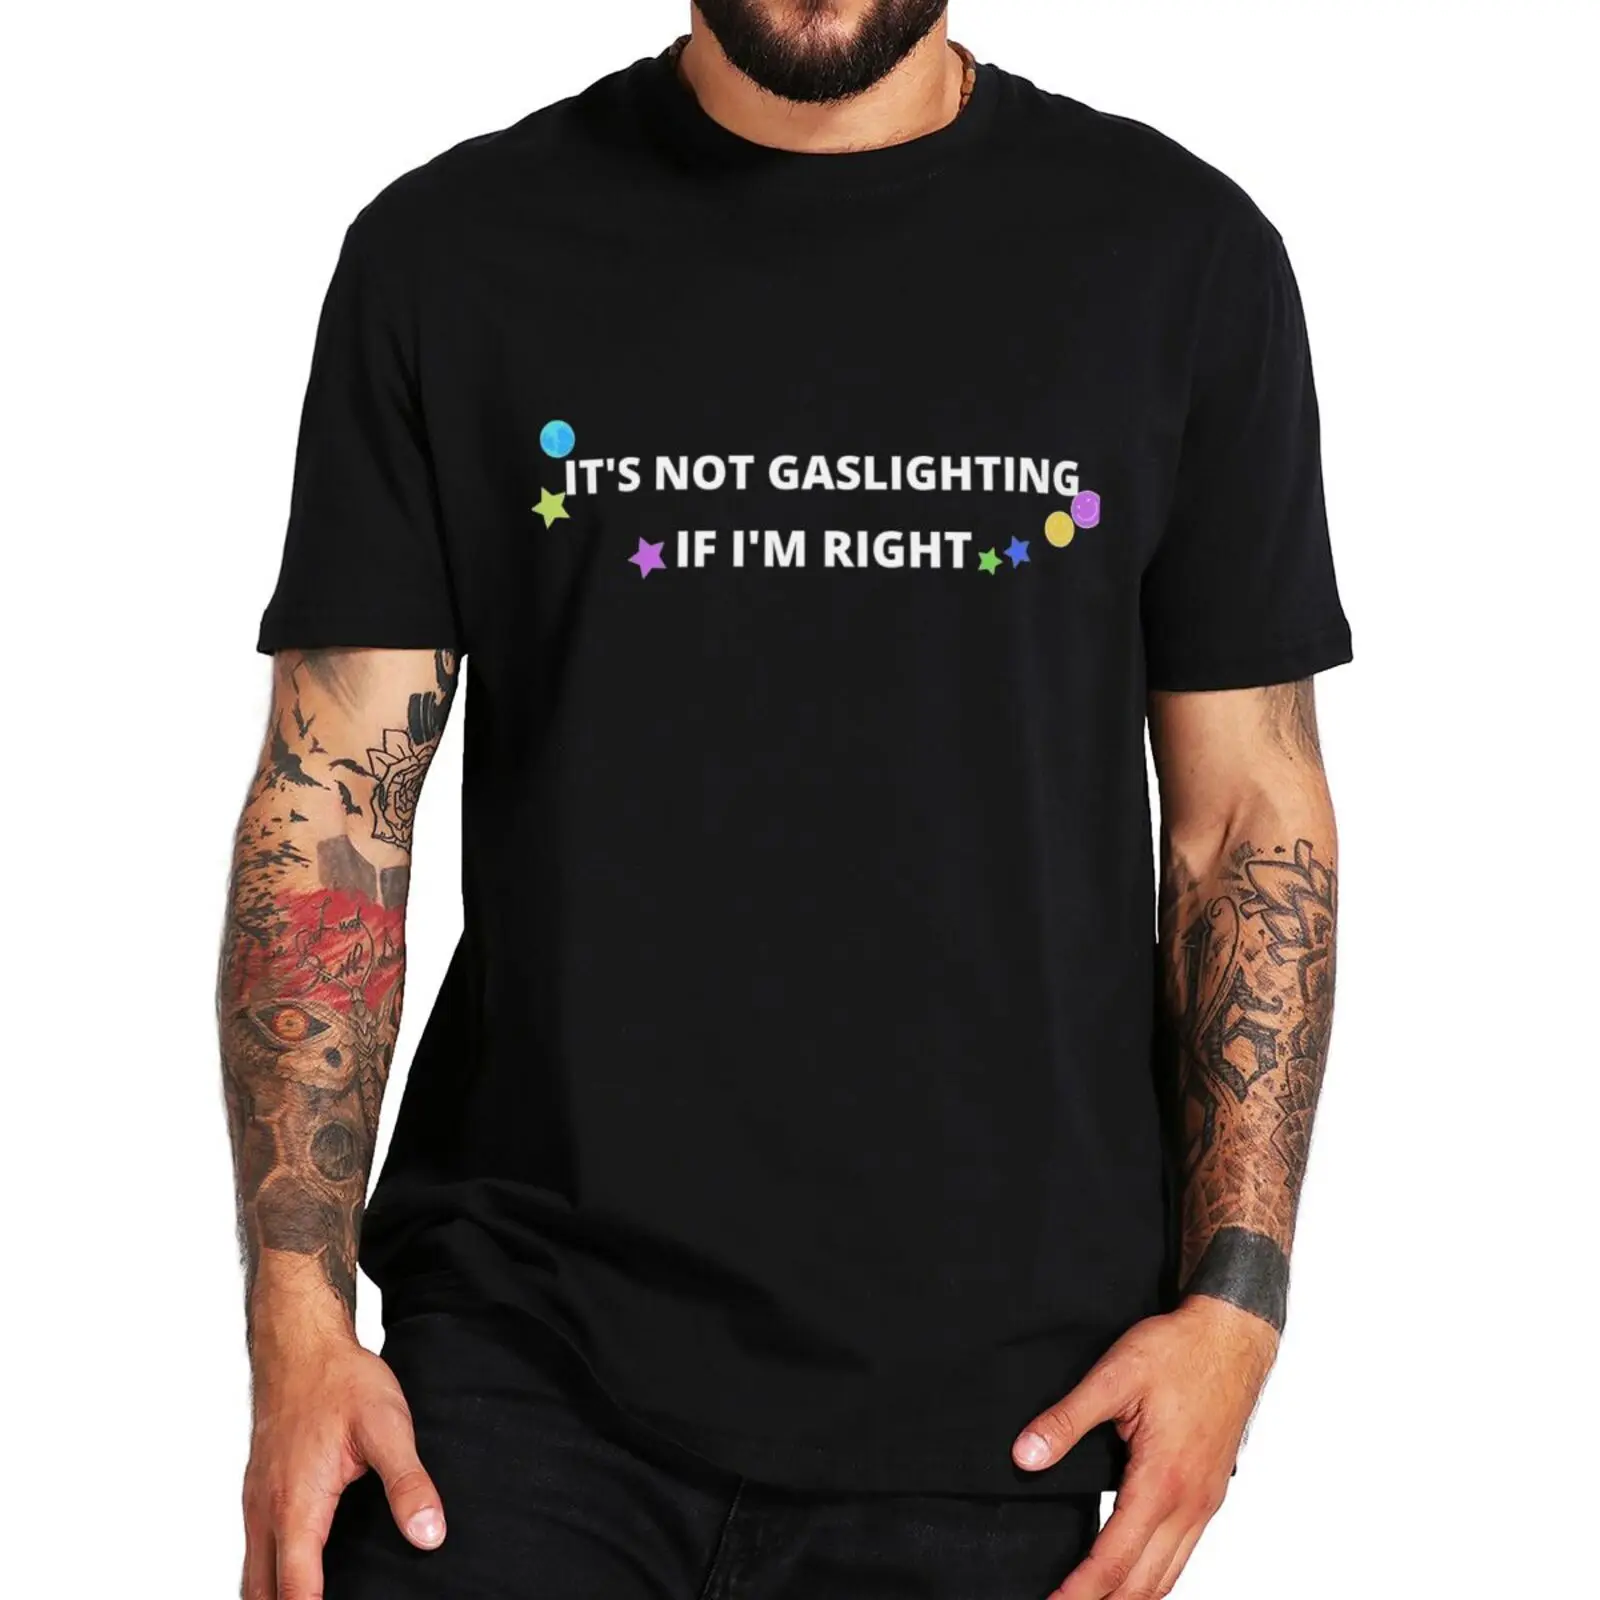 

It’s Not Gaslighting If I'm Right T Shirt Funny Quote Meme Trend Humor Men Women T-shirts Casual Cotton Unisex Soft Tee Tops